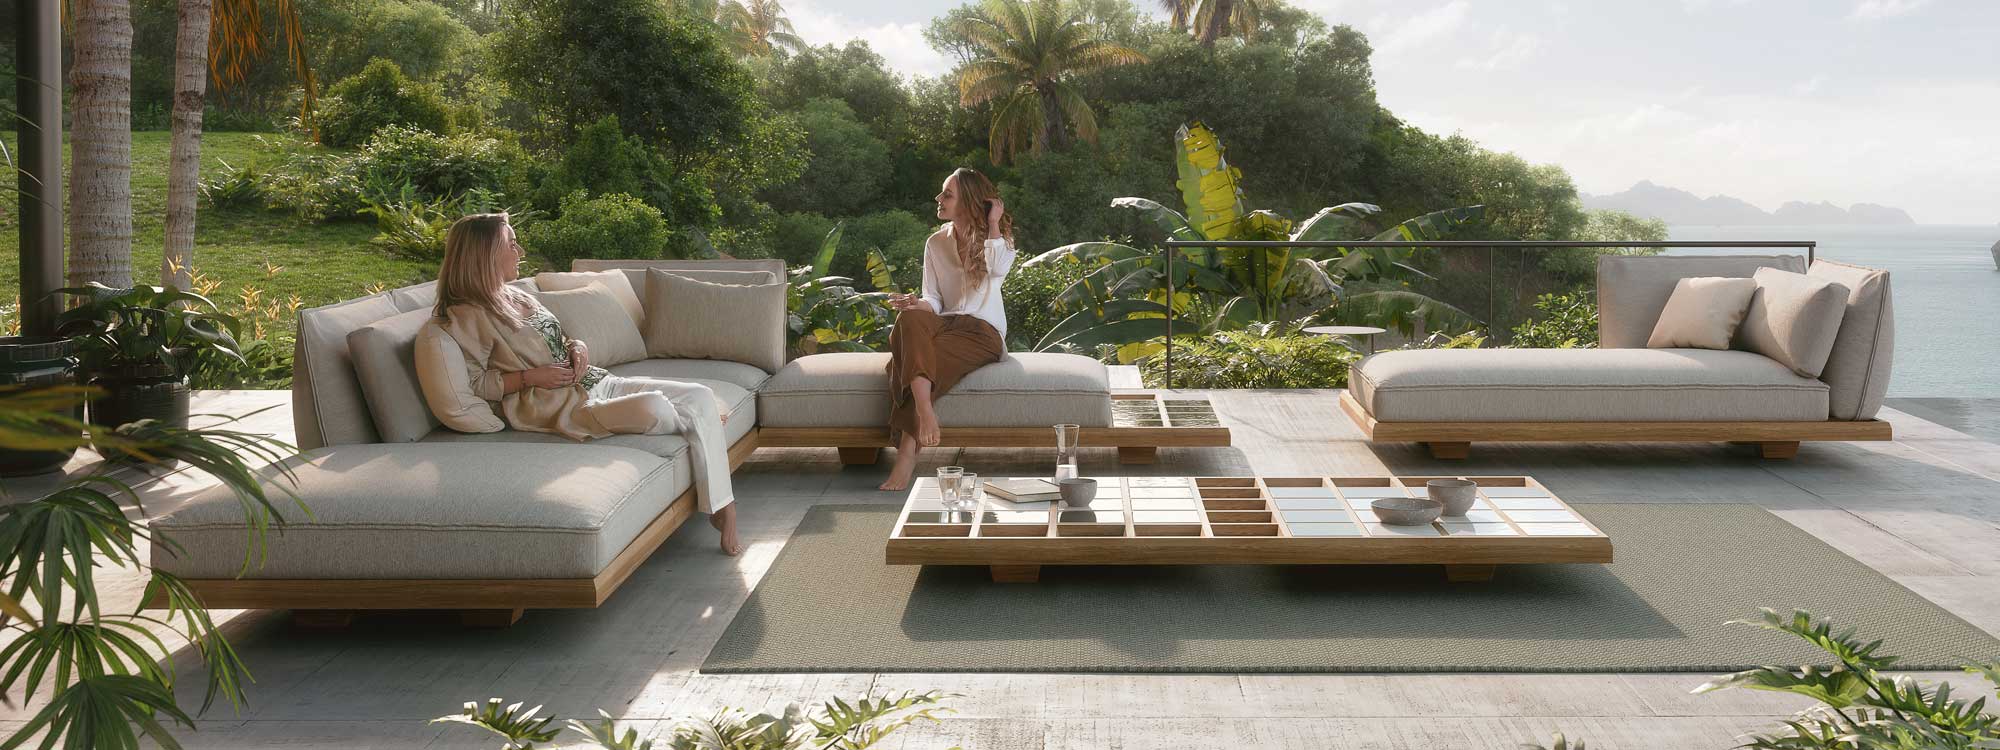 Image of pair of women relaxing on Mozaix modern teak corner sofa and daybed by Royal Botania, with tropical planting and coastline in the background